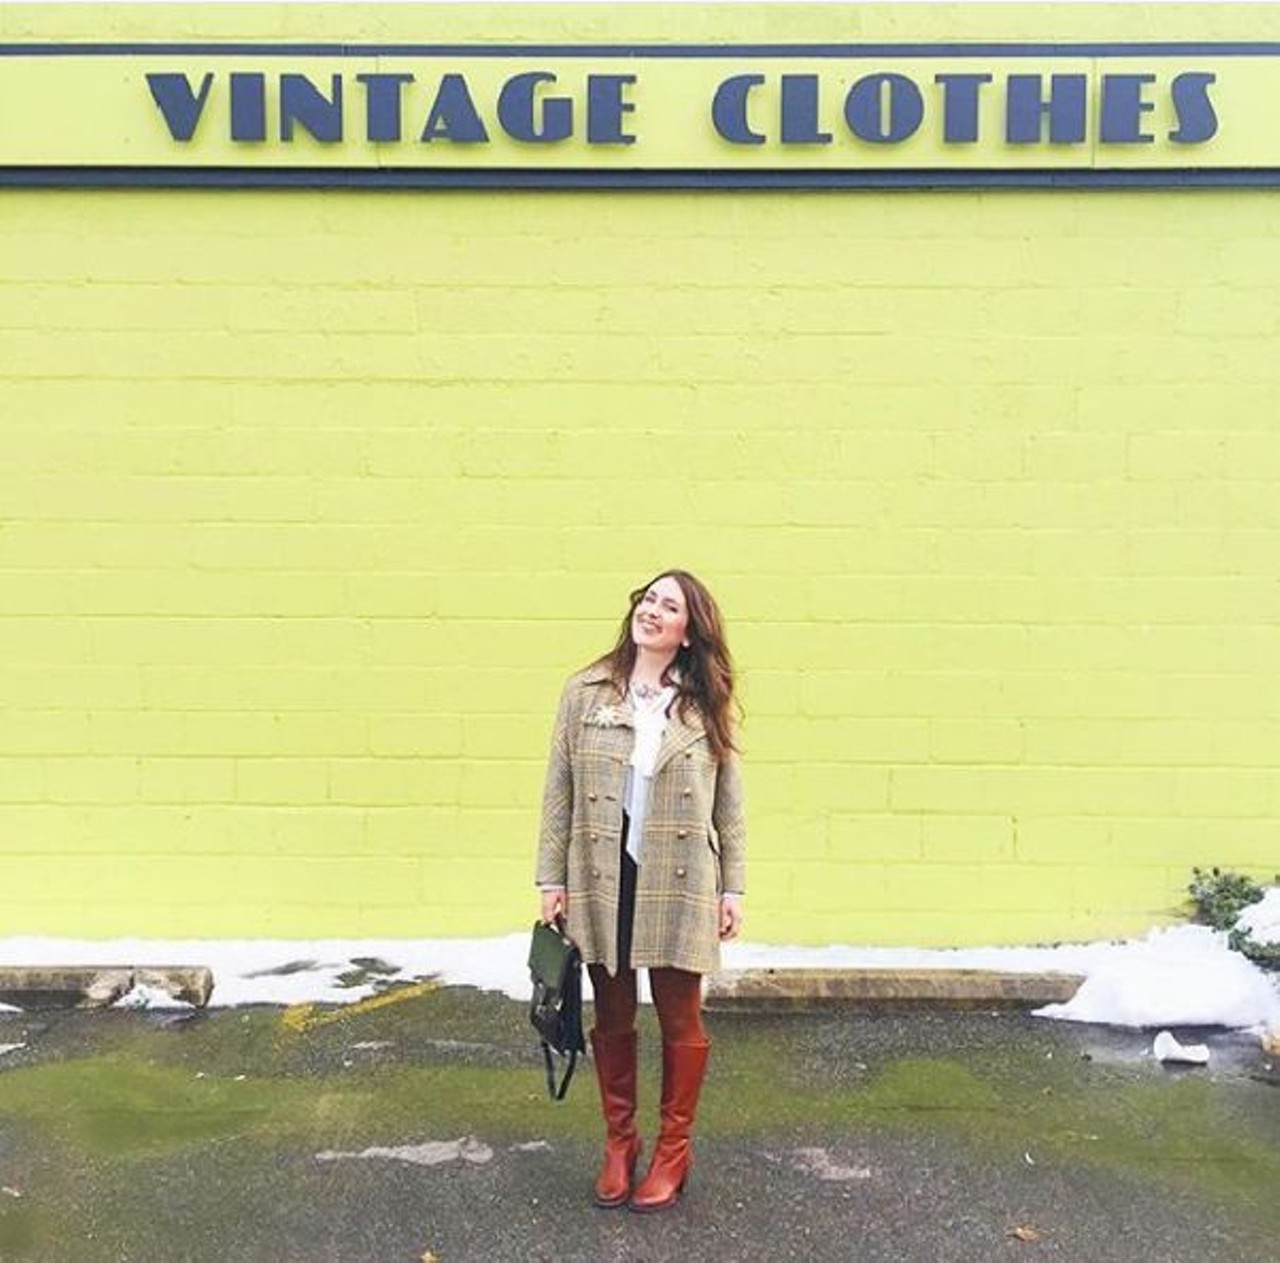  Sweet Lorain
7105 Lorain Rd., 216-281-1959?
Named one of America&#146;s 5 Best Vintage Stores, Sweet Lorain has cornered the market on accessible and affordable vintage clothes for all. 
Photo via mandimakes/Instagram